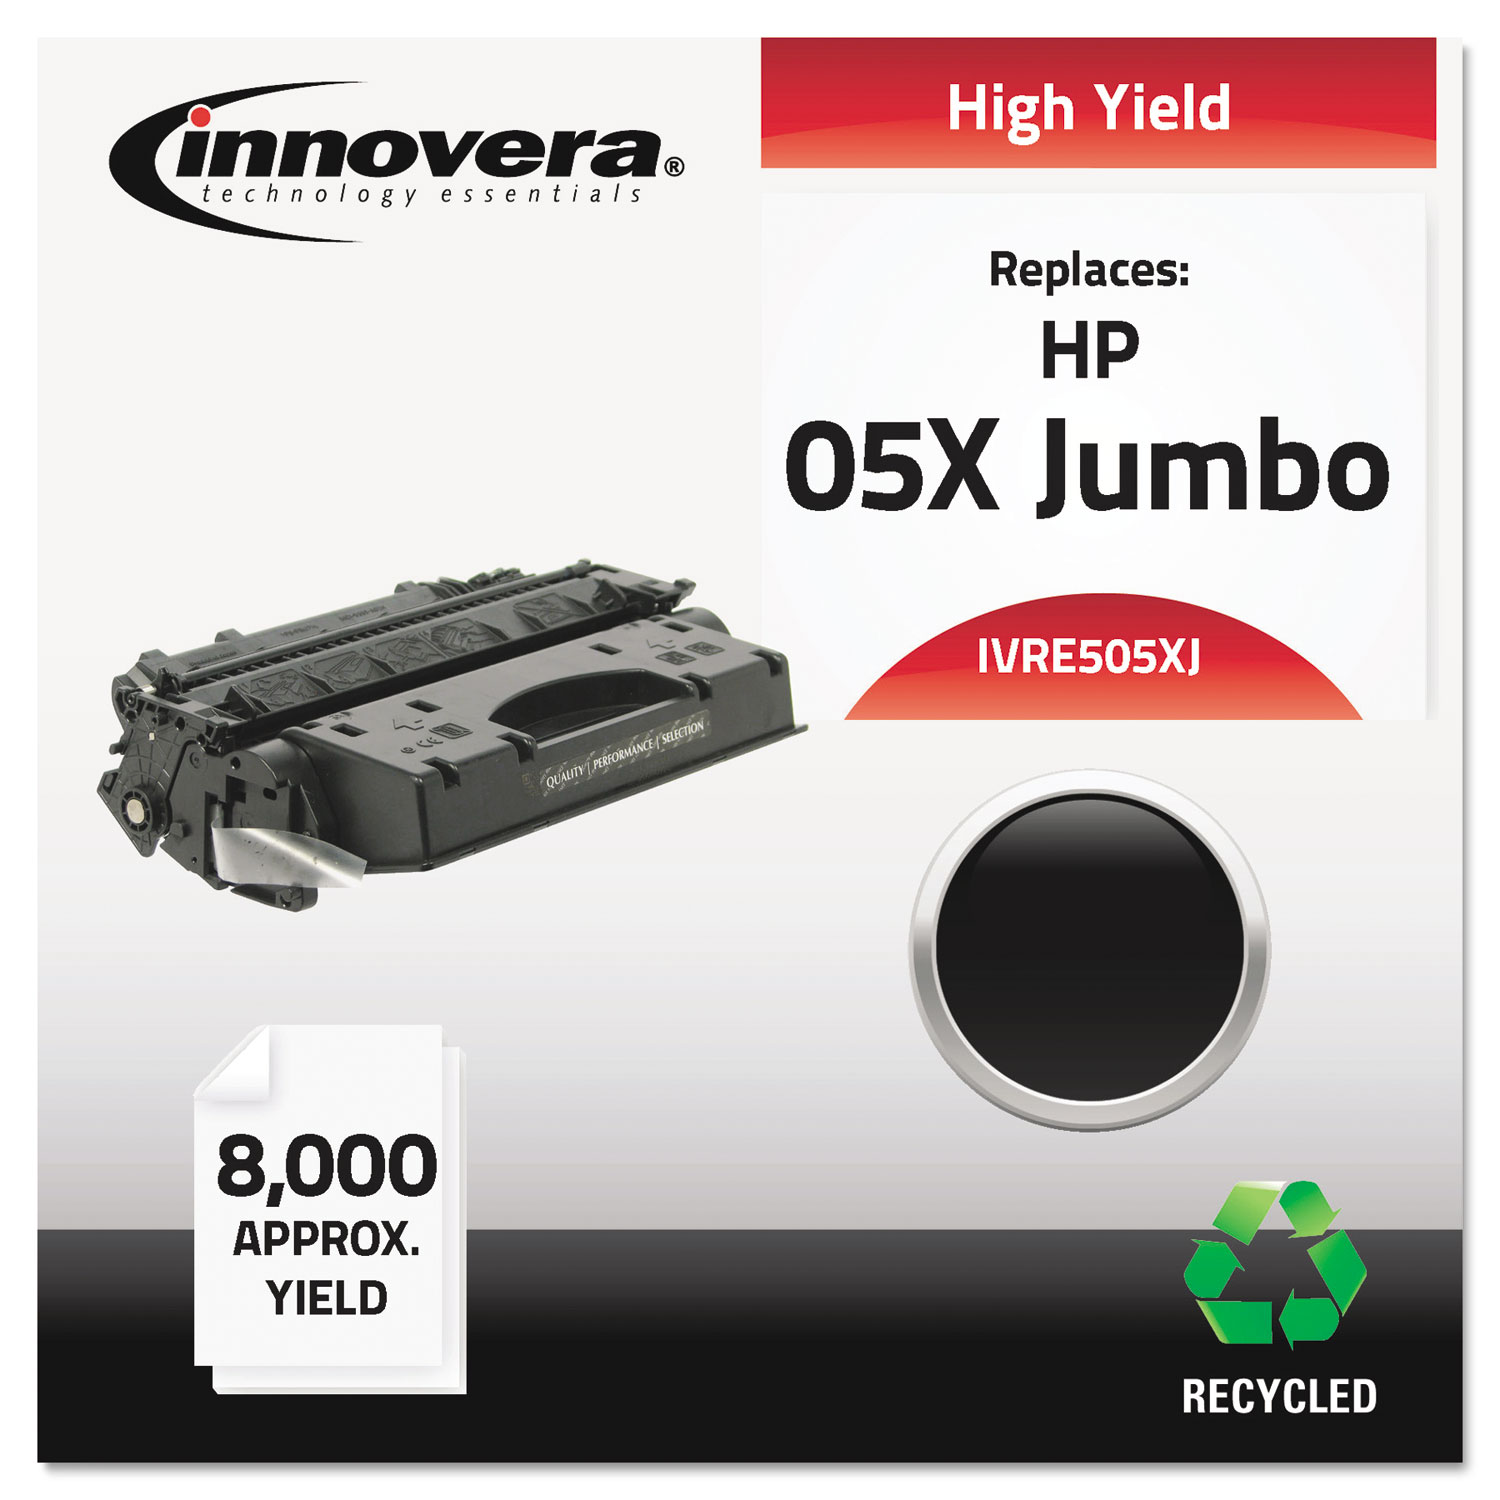 Remanufactured CE505X(J) (05XJ) Extra High-Yield Toner, 8000 Page-Yield, Black